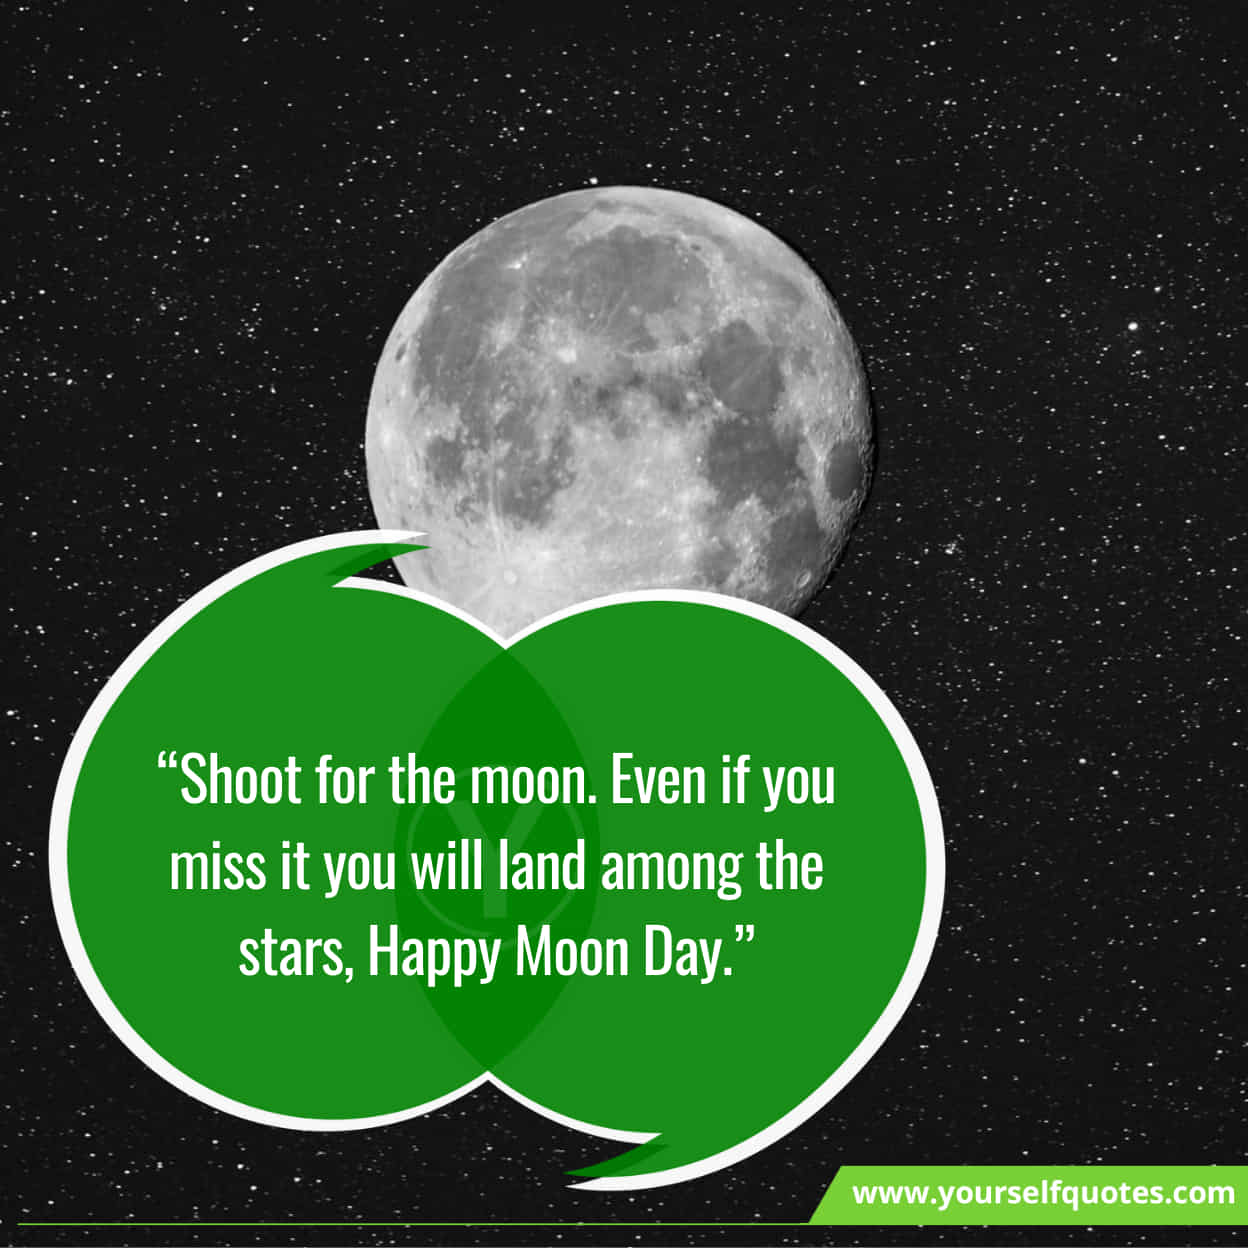 Moon Day Inspiring Quotes